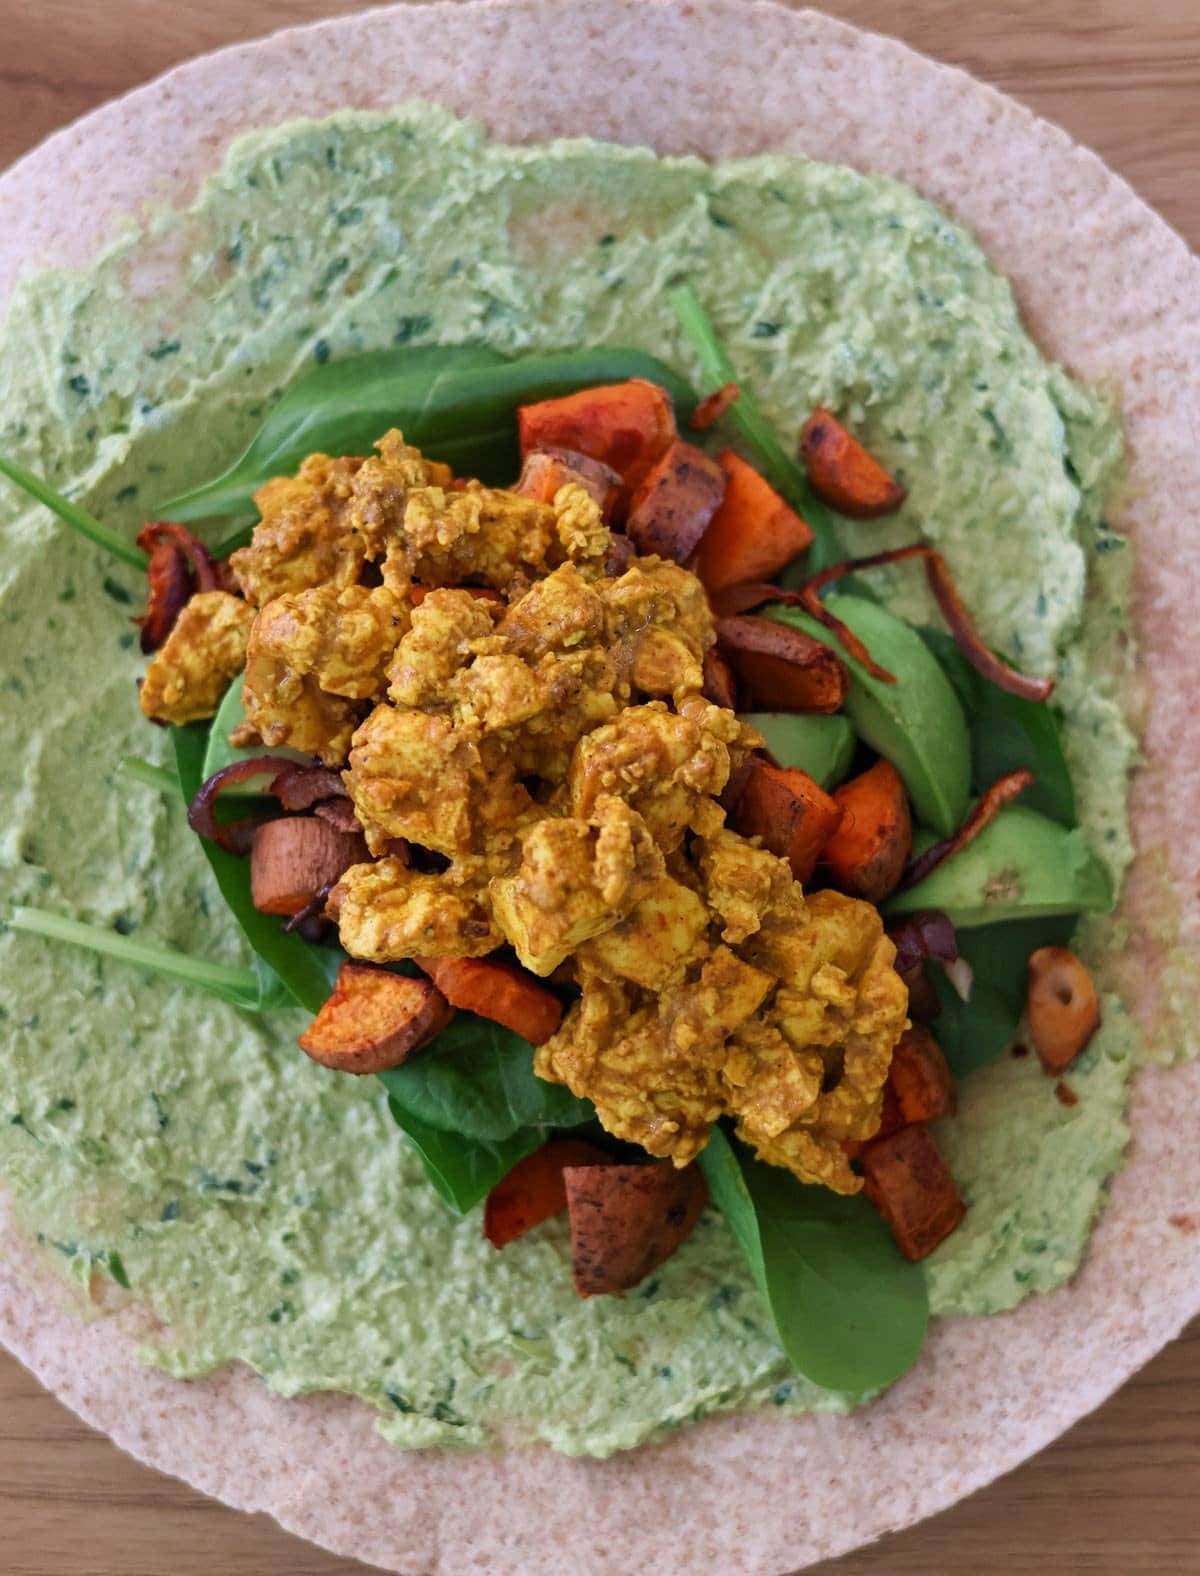 a wrap topped with scrambled tofu, sweet potato, red onion, spinach, avocado and a green sauce.